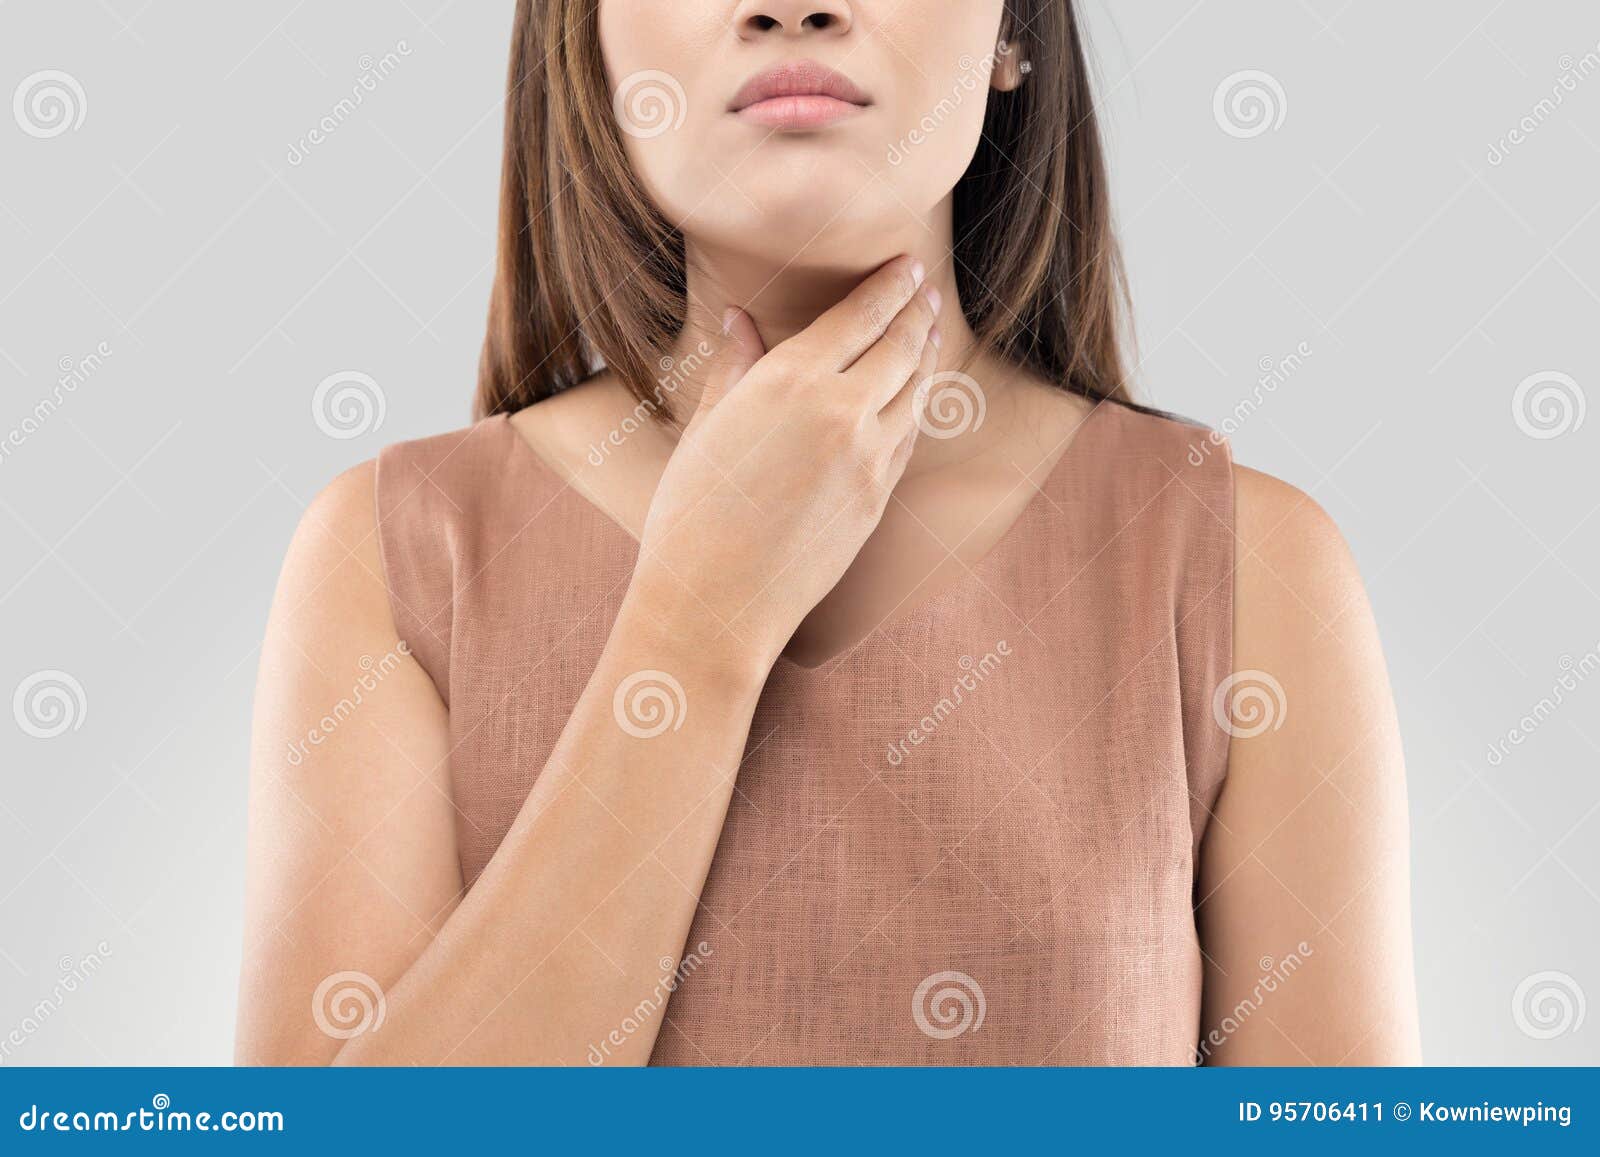 sore throat woman on gray background